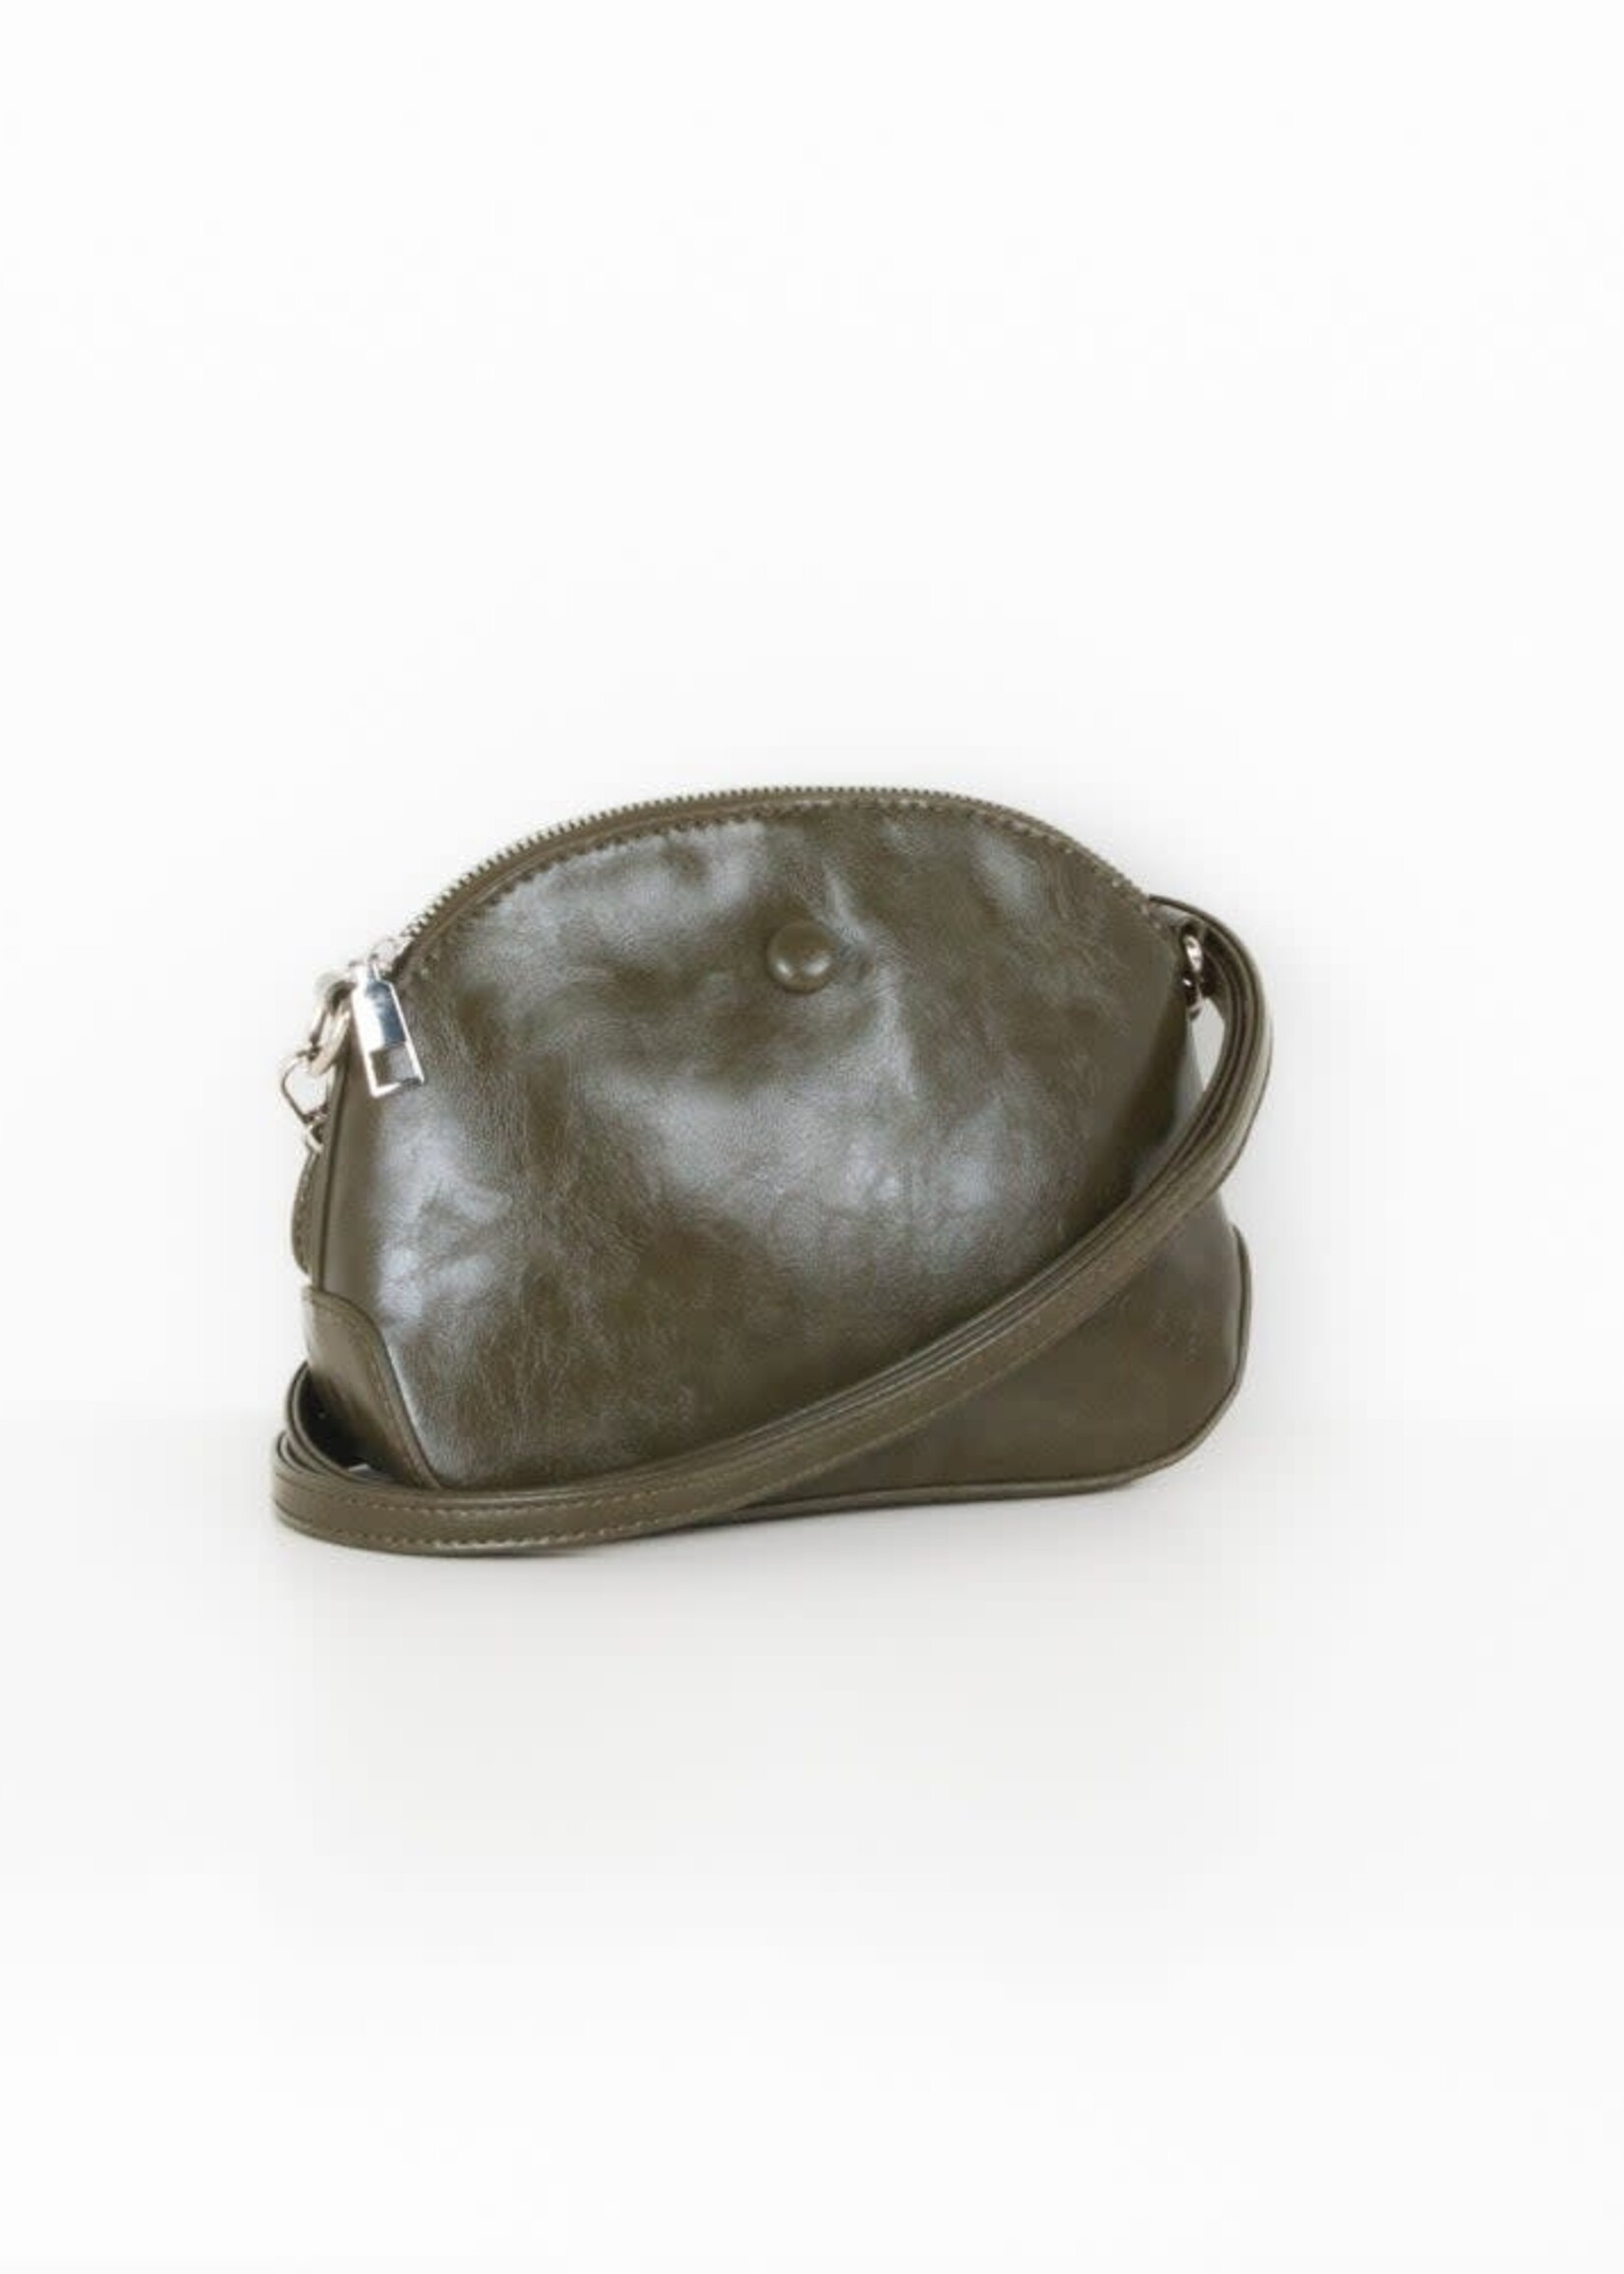 Caracol Caracol Small Domed XBody Bag Olive 7105-OLV